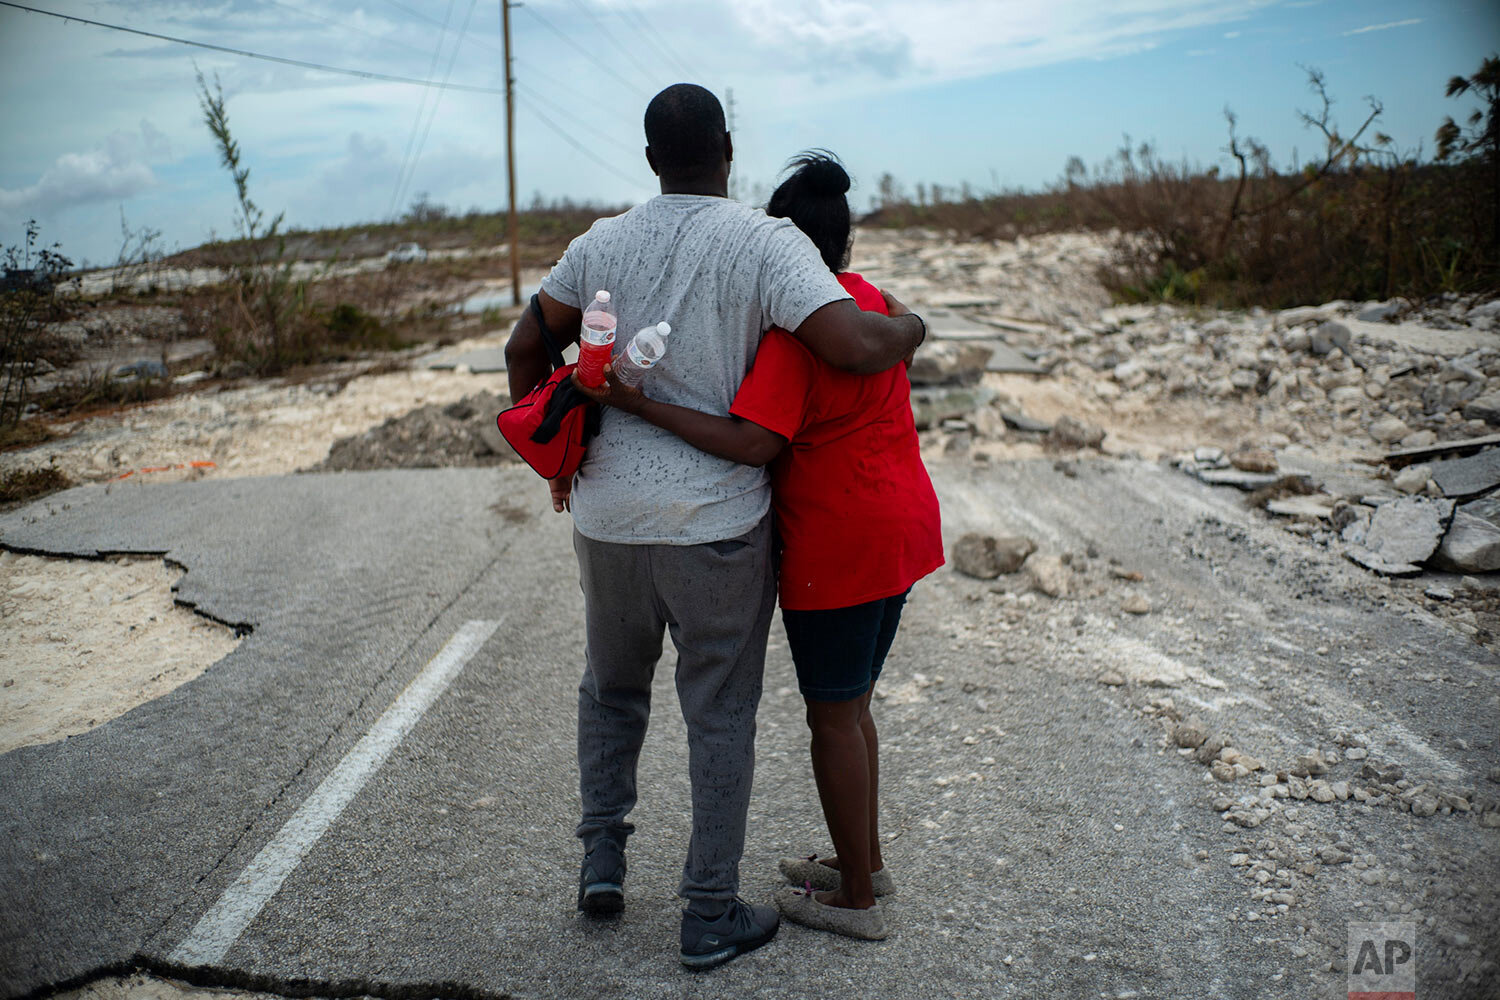  A couple embraces on a road destroyed by Hurricane Dorian, as they walk to the town of High Rock to try and find their relatives in the aftermath of Hurricane Dorian, in Grand Bahama, Bahamas, Thursday, Sept. 5, 2019. (AP Photo/Ramon Espinosa) 